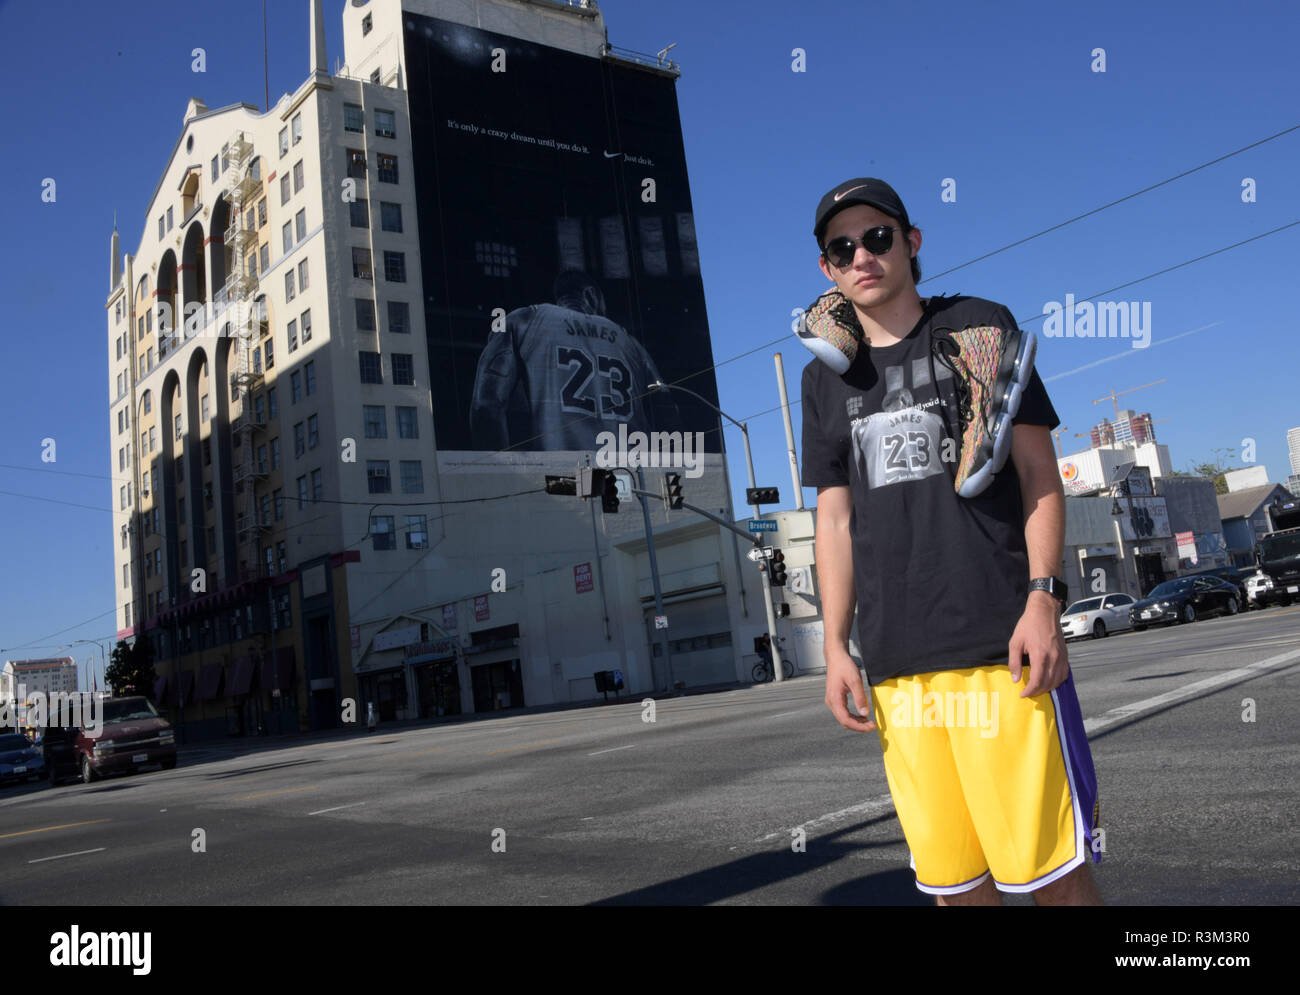 Los Angeles, United States. 02nd Nov, 2018. Dylan Stewart of Riverside,  Calif. poses in front of Nike ad featuring Los Angeles Lakers forward LeBron  James to commemorate the 30th anniversary of the "